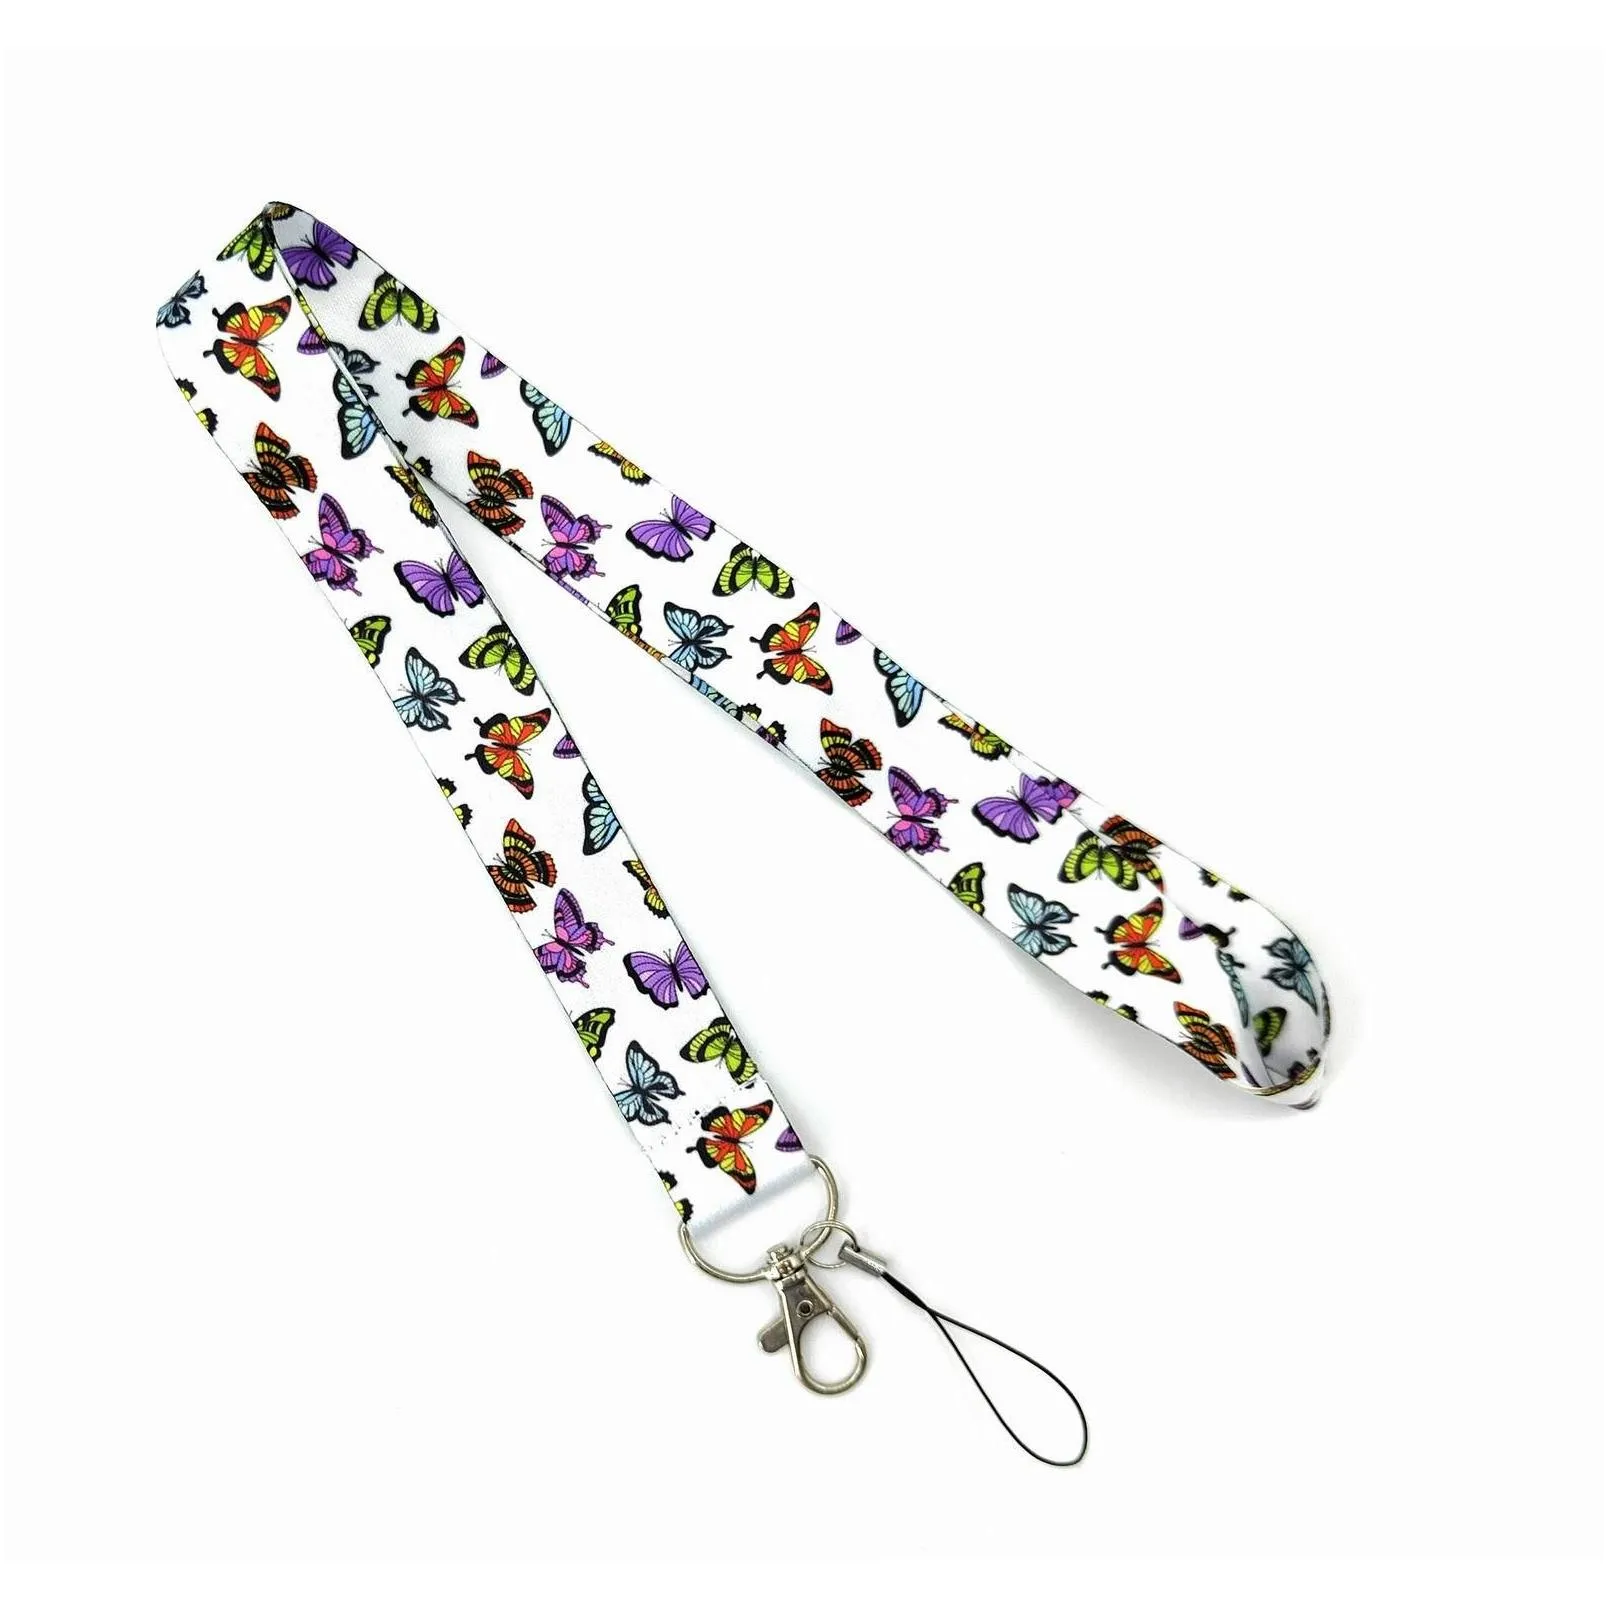 butterfly neck strap lanyard for key cameras id card badge holder cell phone straps hanging rope lanyards